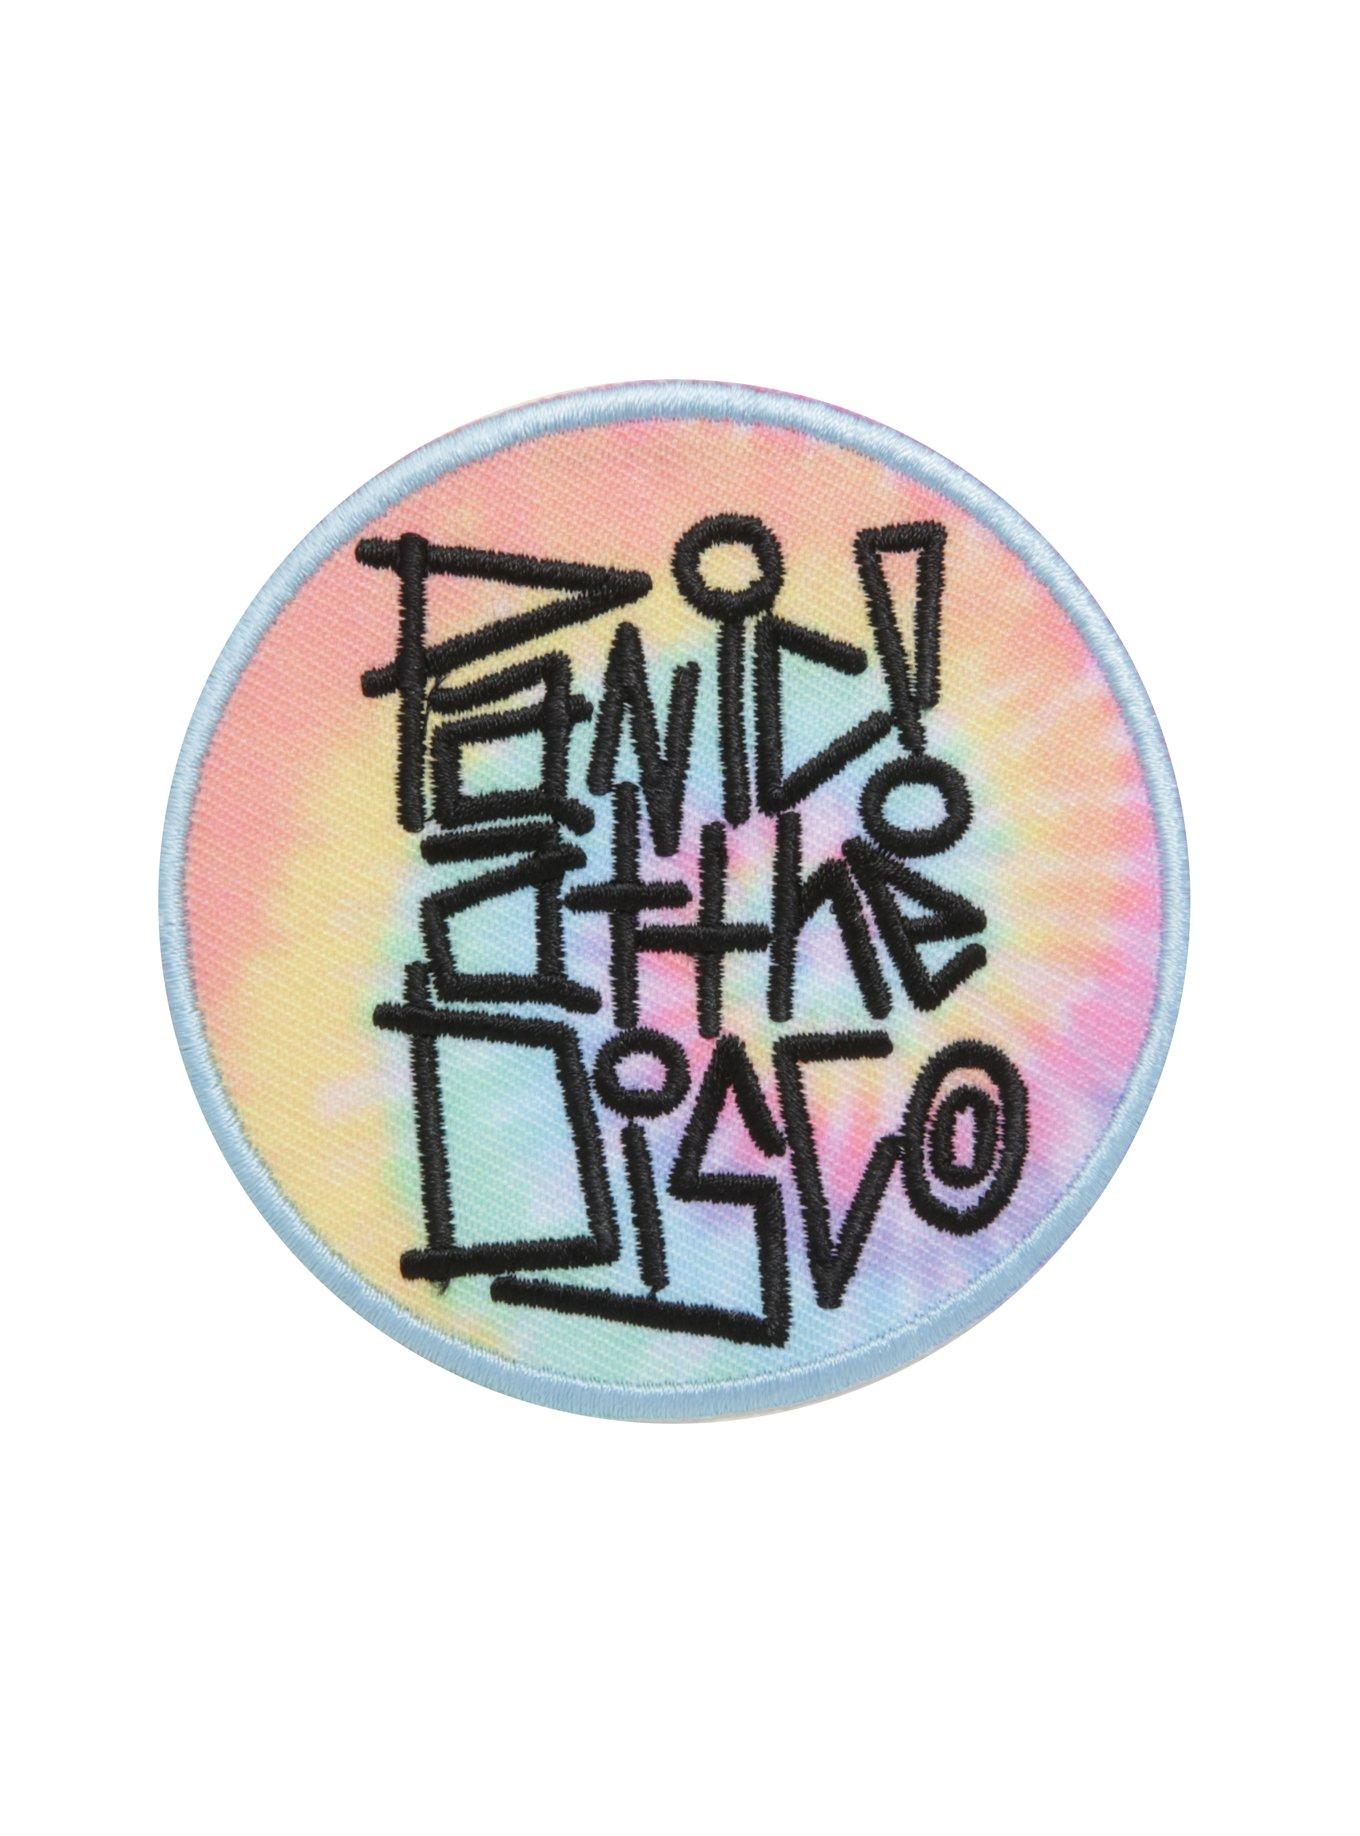 Panic! At The Disco Tie-Dye Iron-On Patch, , hi-res